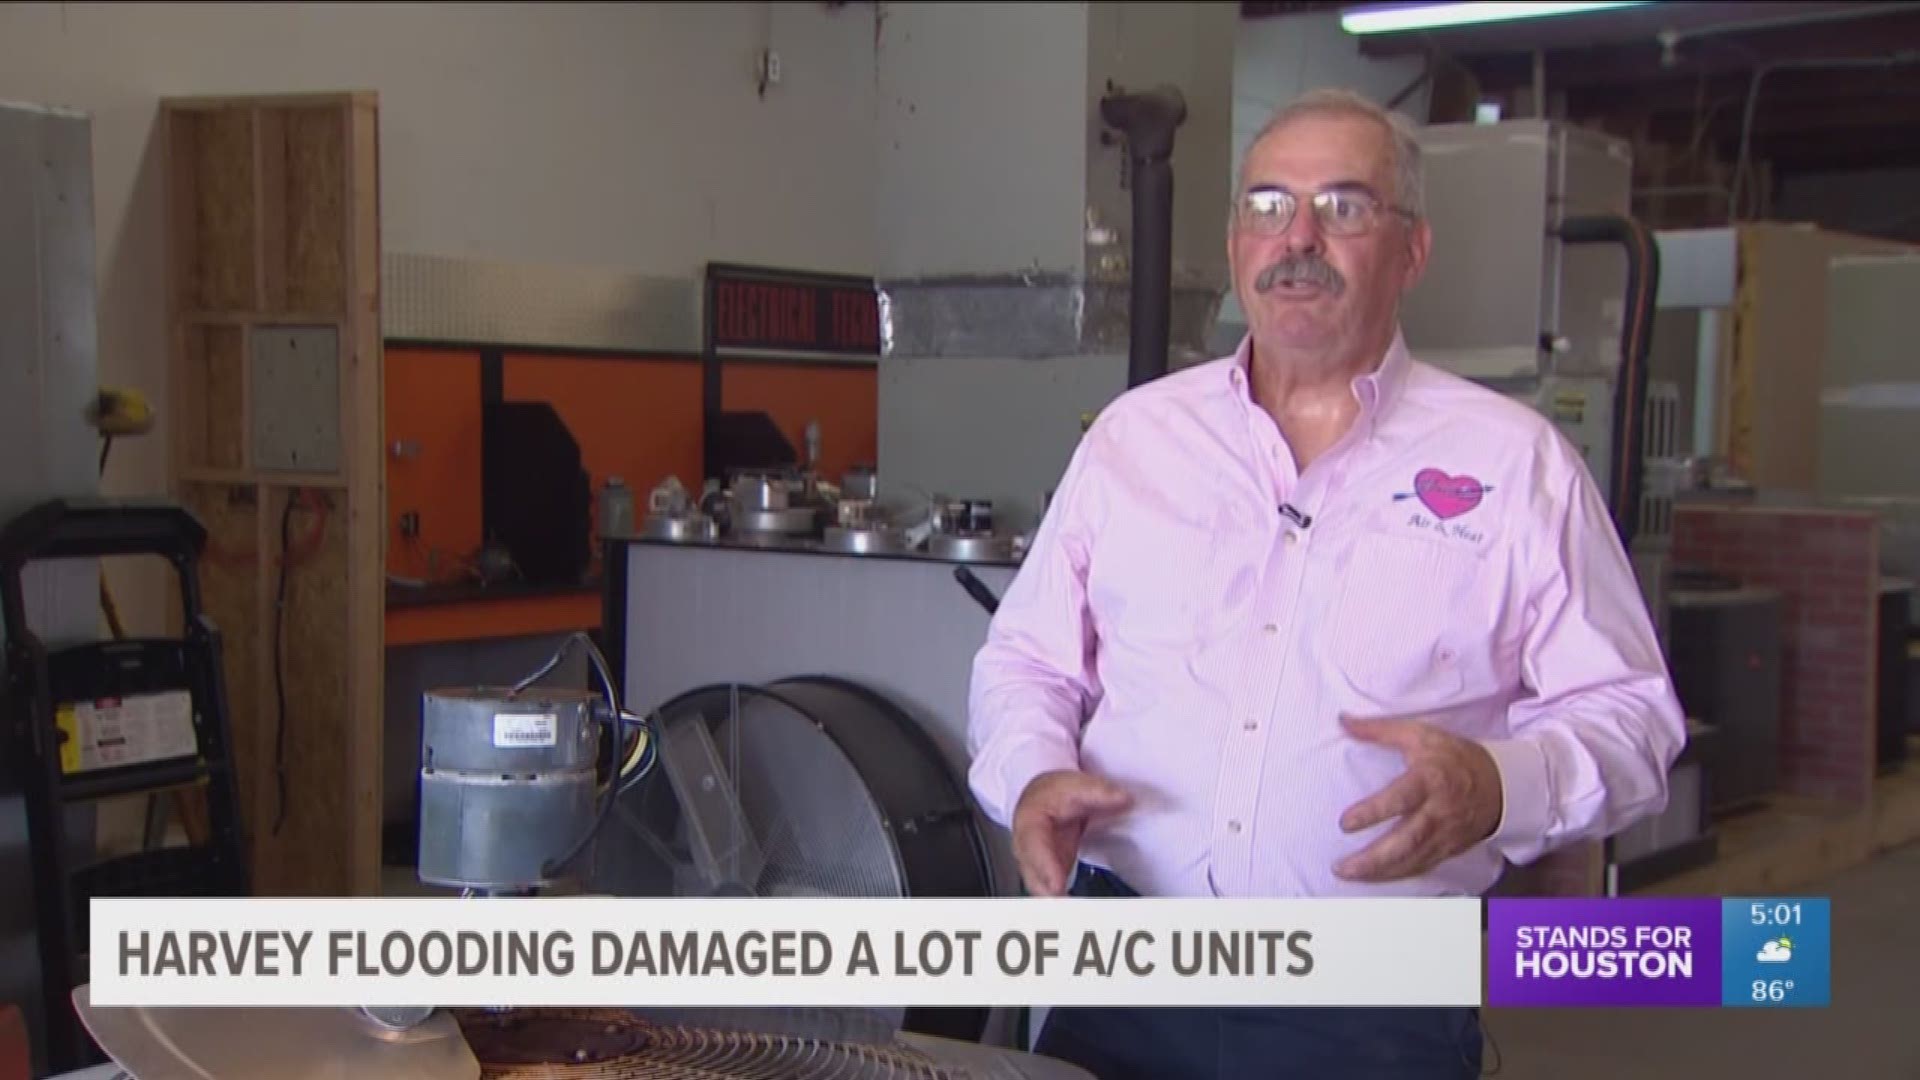 With hurricane season almost here, KHOU spoke with an expert about how to keep your AC unit up and running.